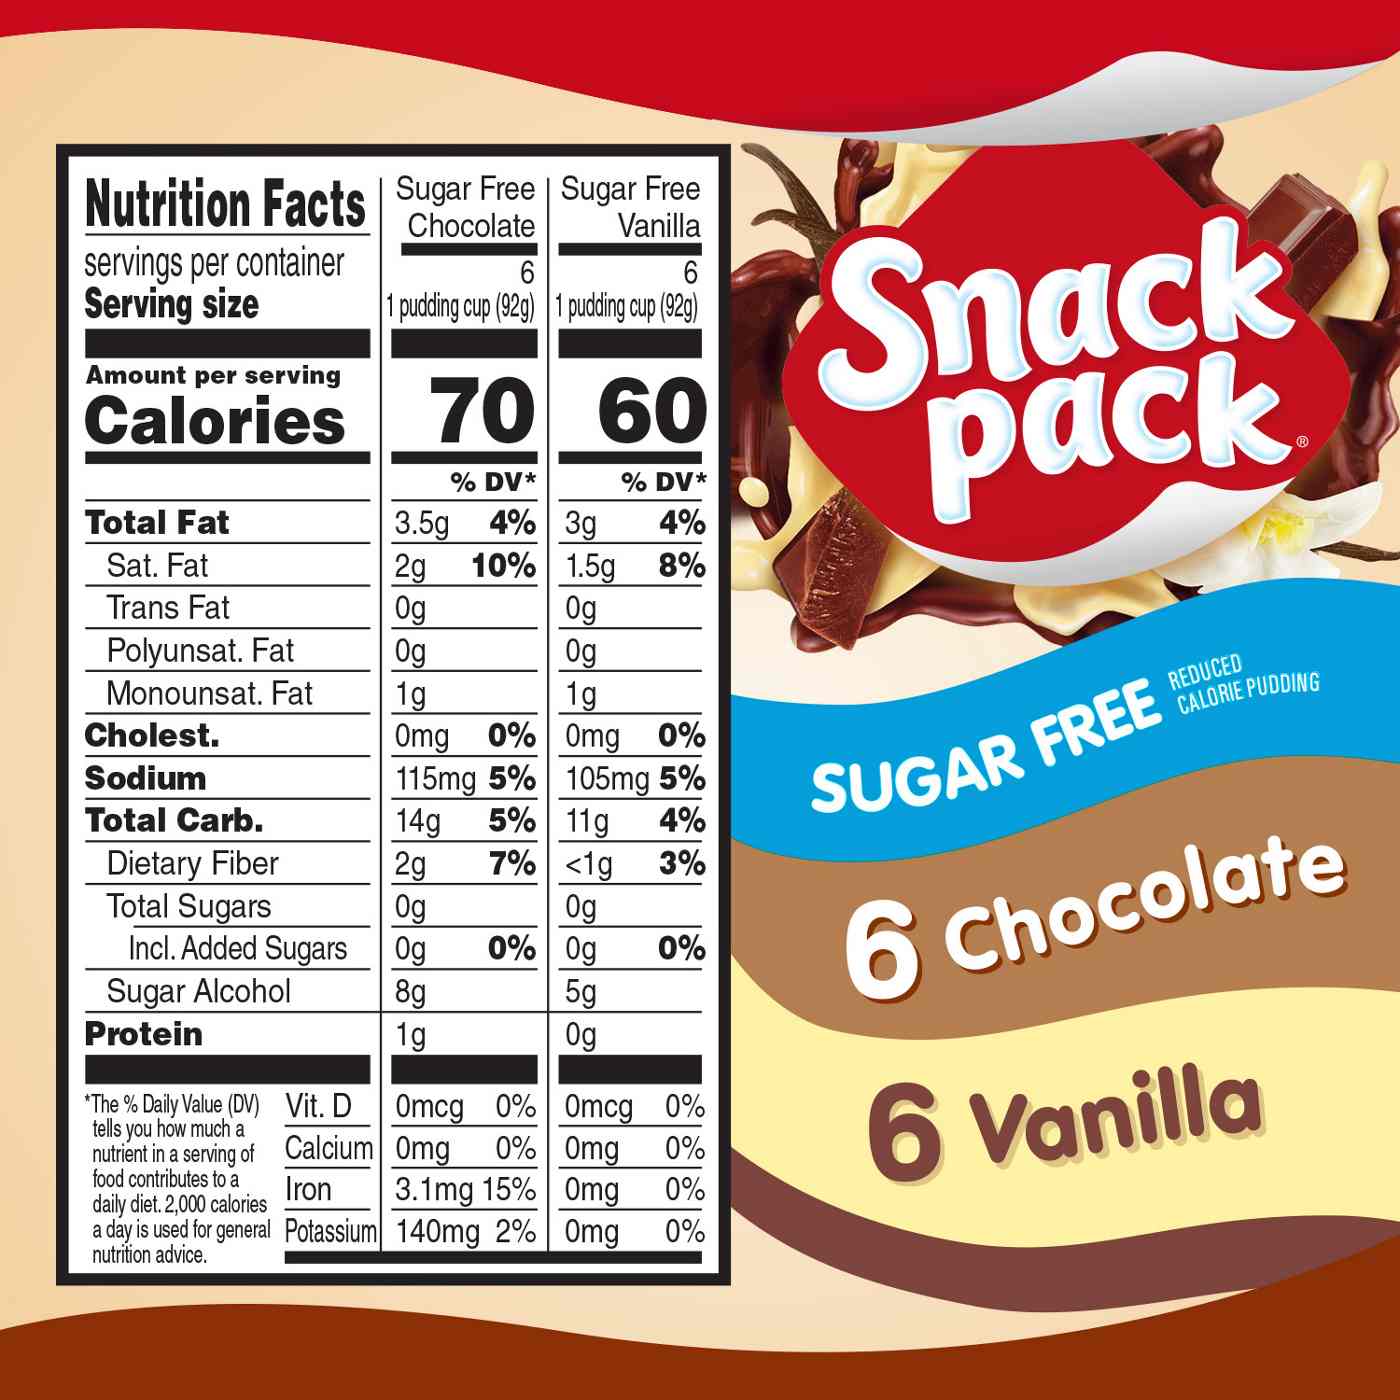 Snack Pack Sugar Free Chocolate & Vanilla Pudding Cups Family Pack; image 2 of 7